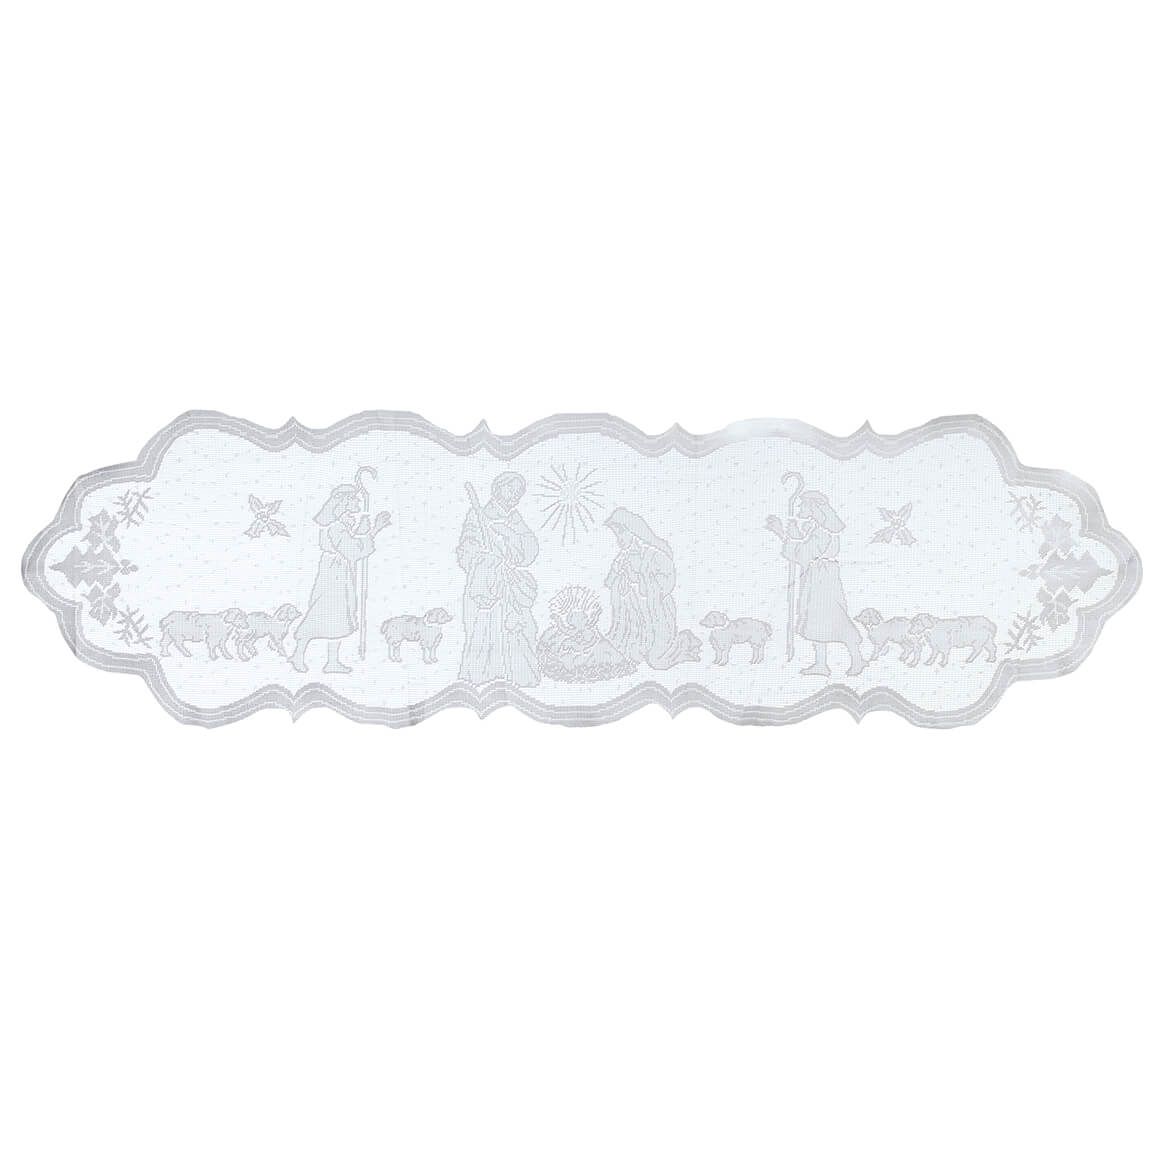 Silent Night Lace Table Runner + '-' + 372363